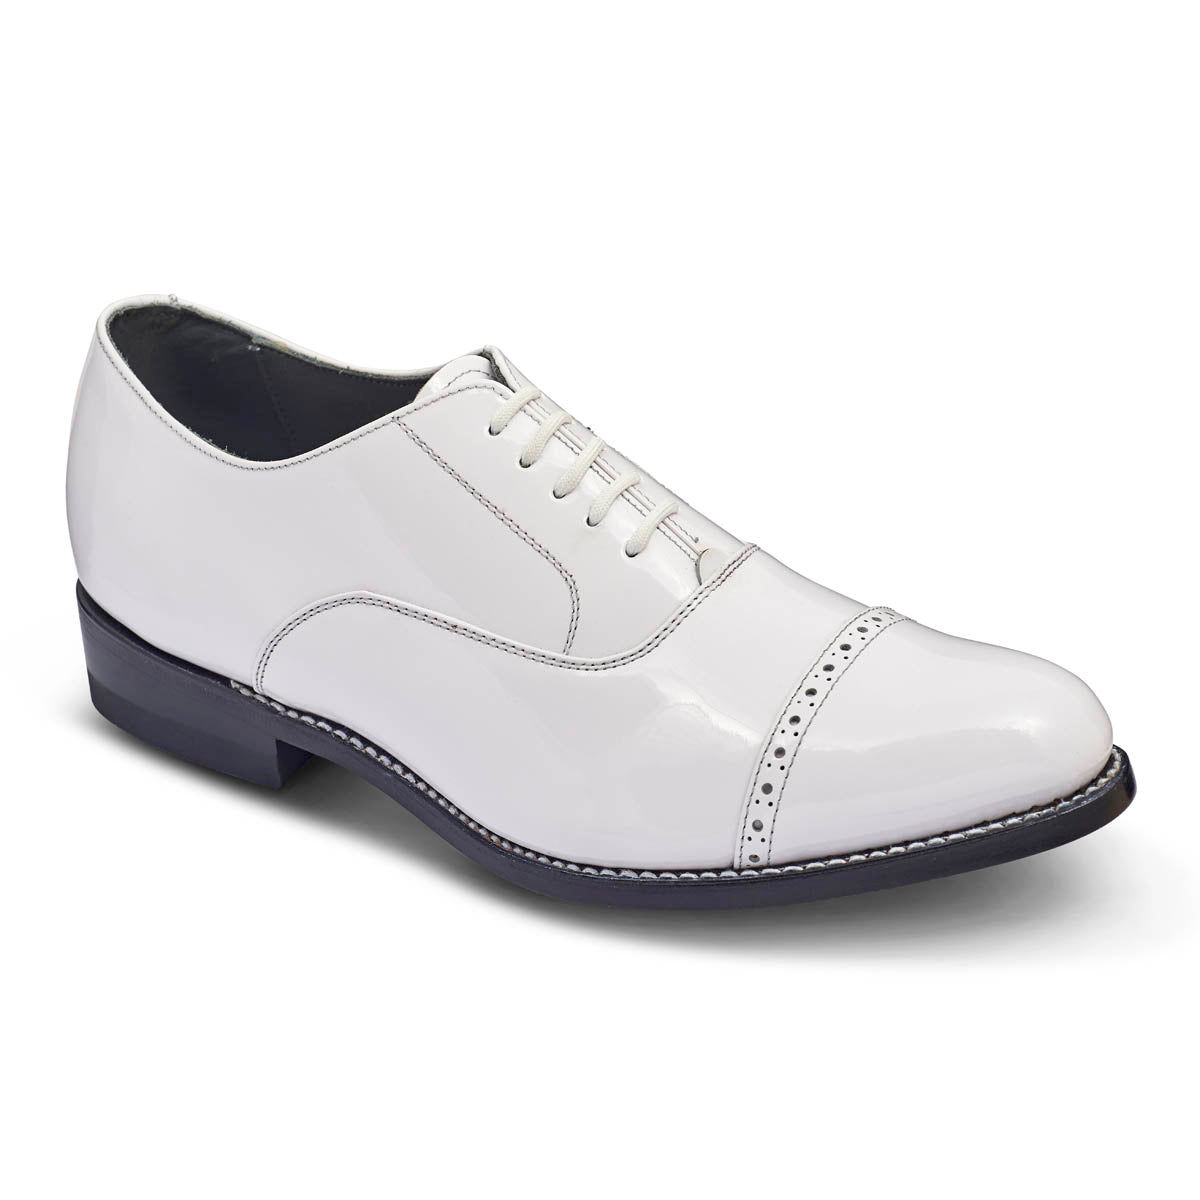 Exclusive Stacy Penner Leather Dress Shoes | Penner's - San Antonio ...